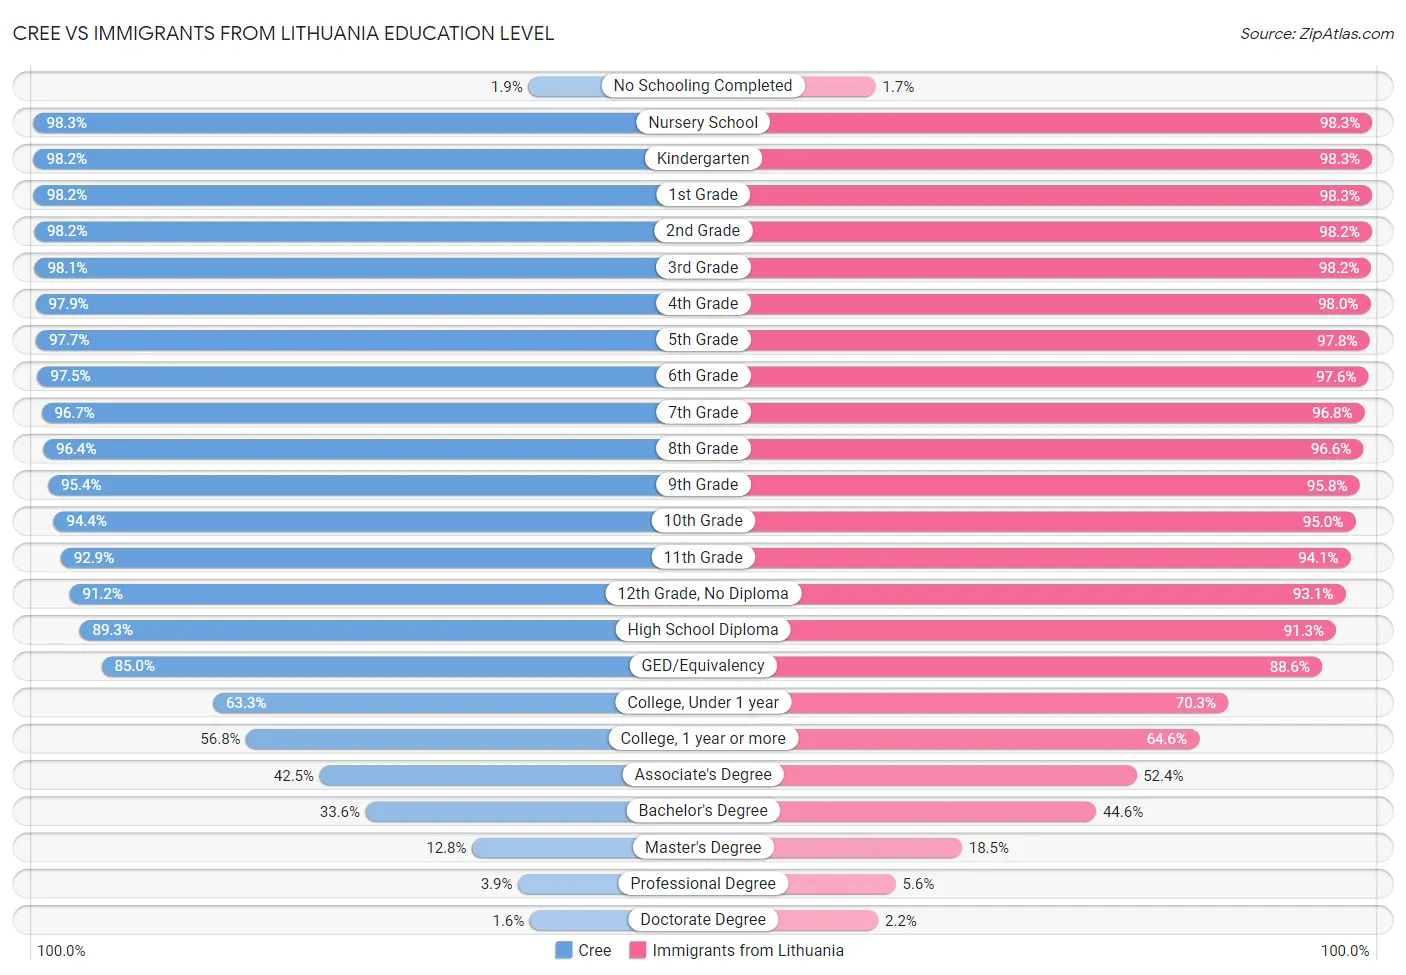 Cree vs Immigrants from Lithuania Education Level